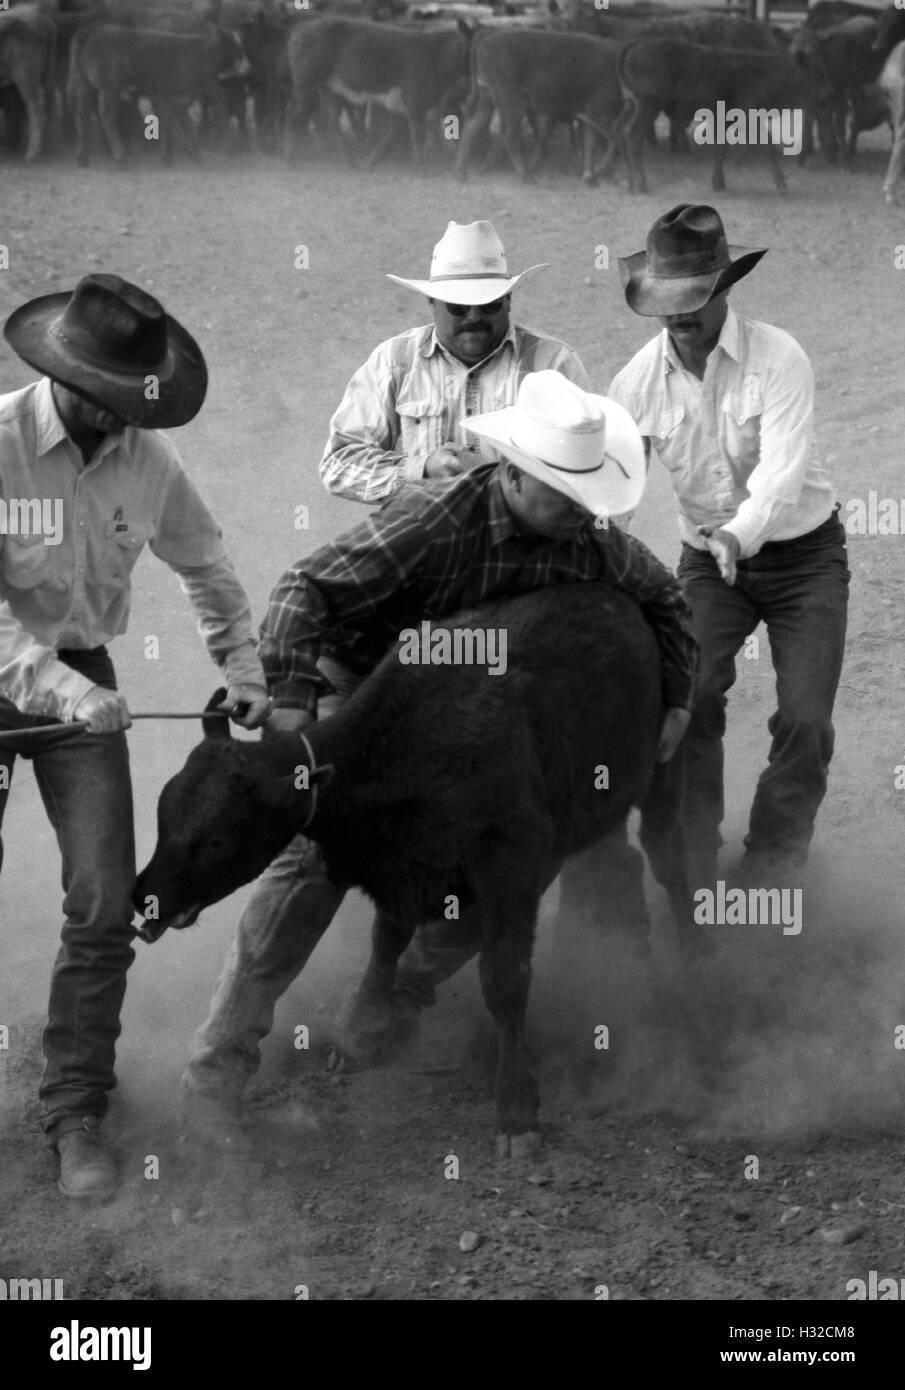 Cowboys attempt to throw calf in preparation of branding (scan from b&w negative) circa 1998 Stock Photo